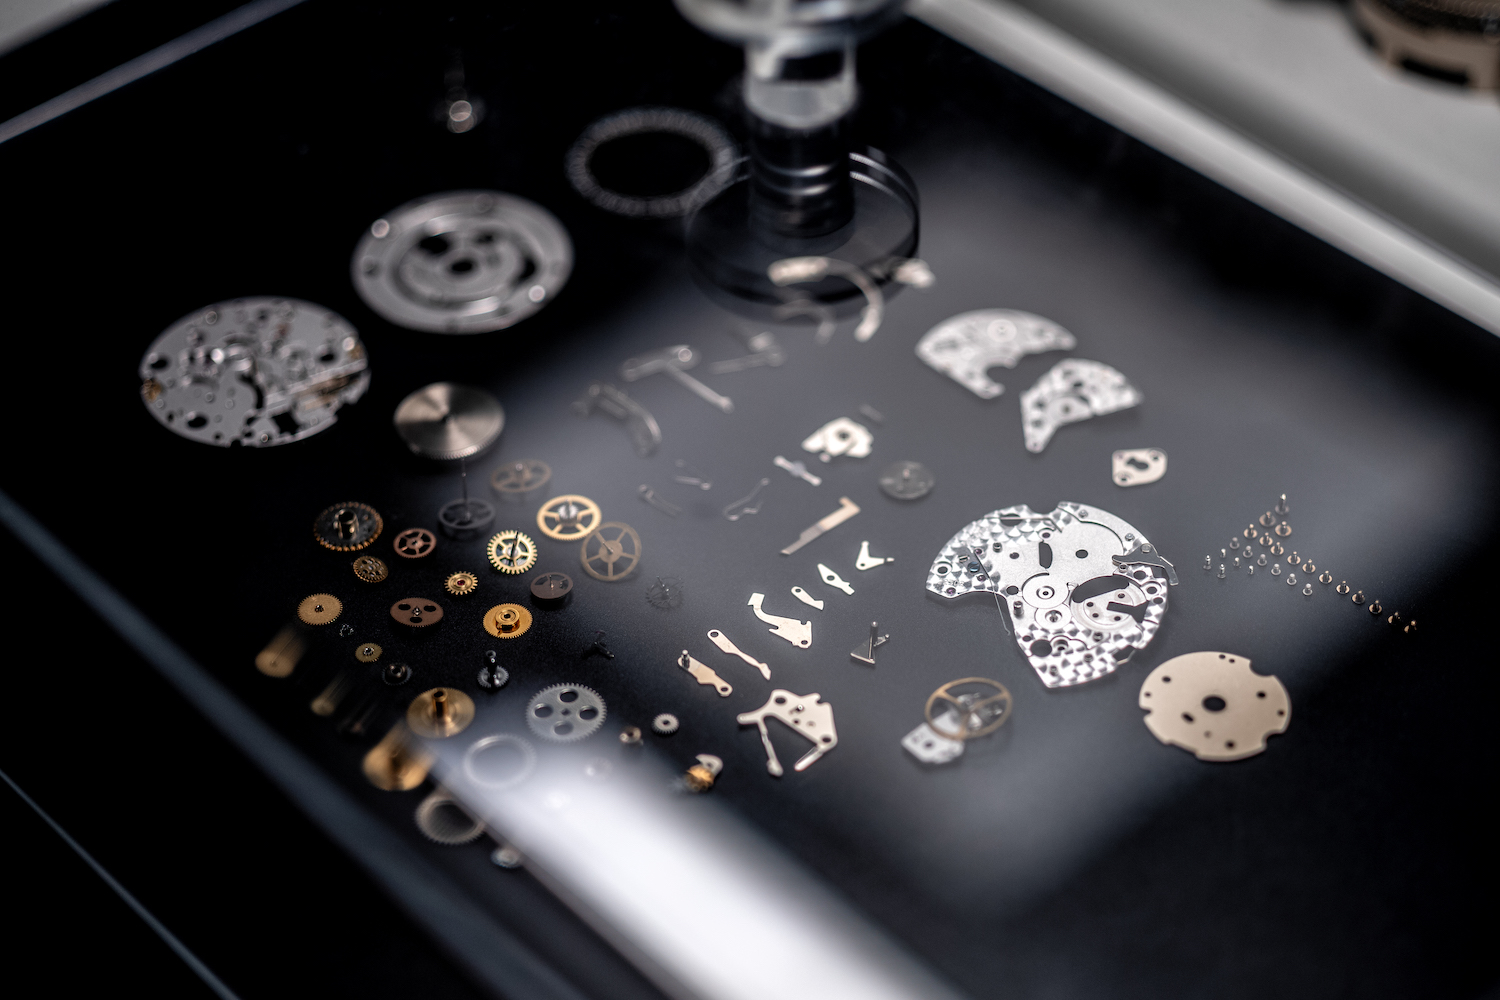 Watch parts on display in a case.